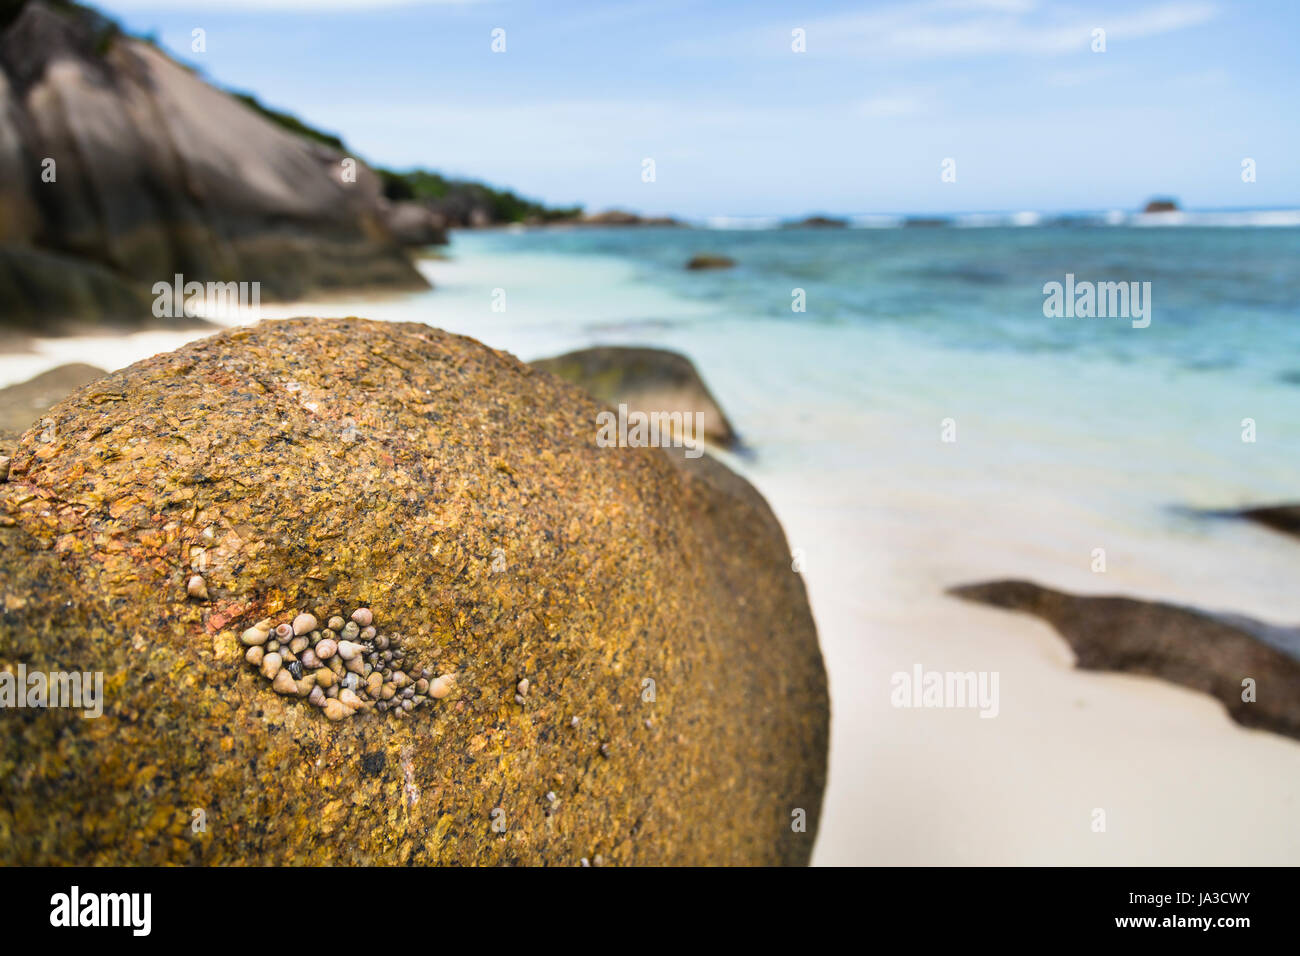 A tightly packed group of sea shells on a granite rock in La Digue, Seychelles with a beach in the background Stock Photo